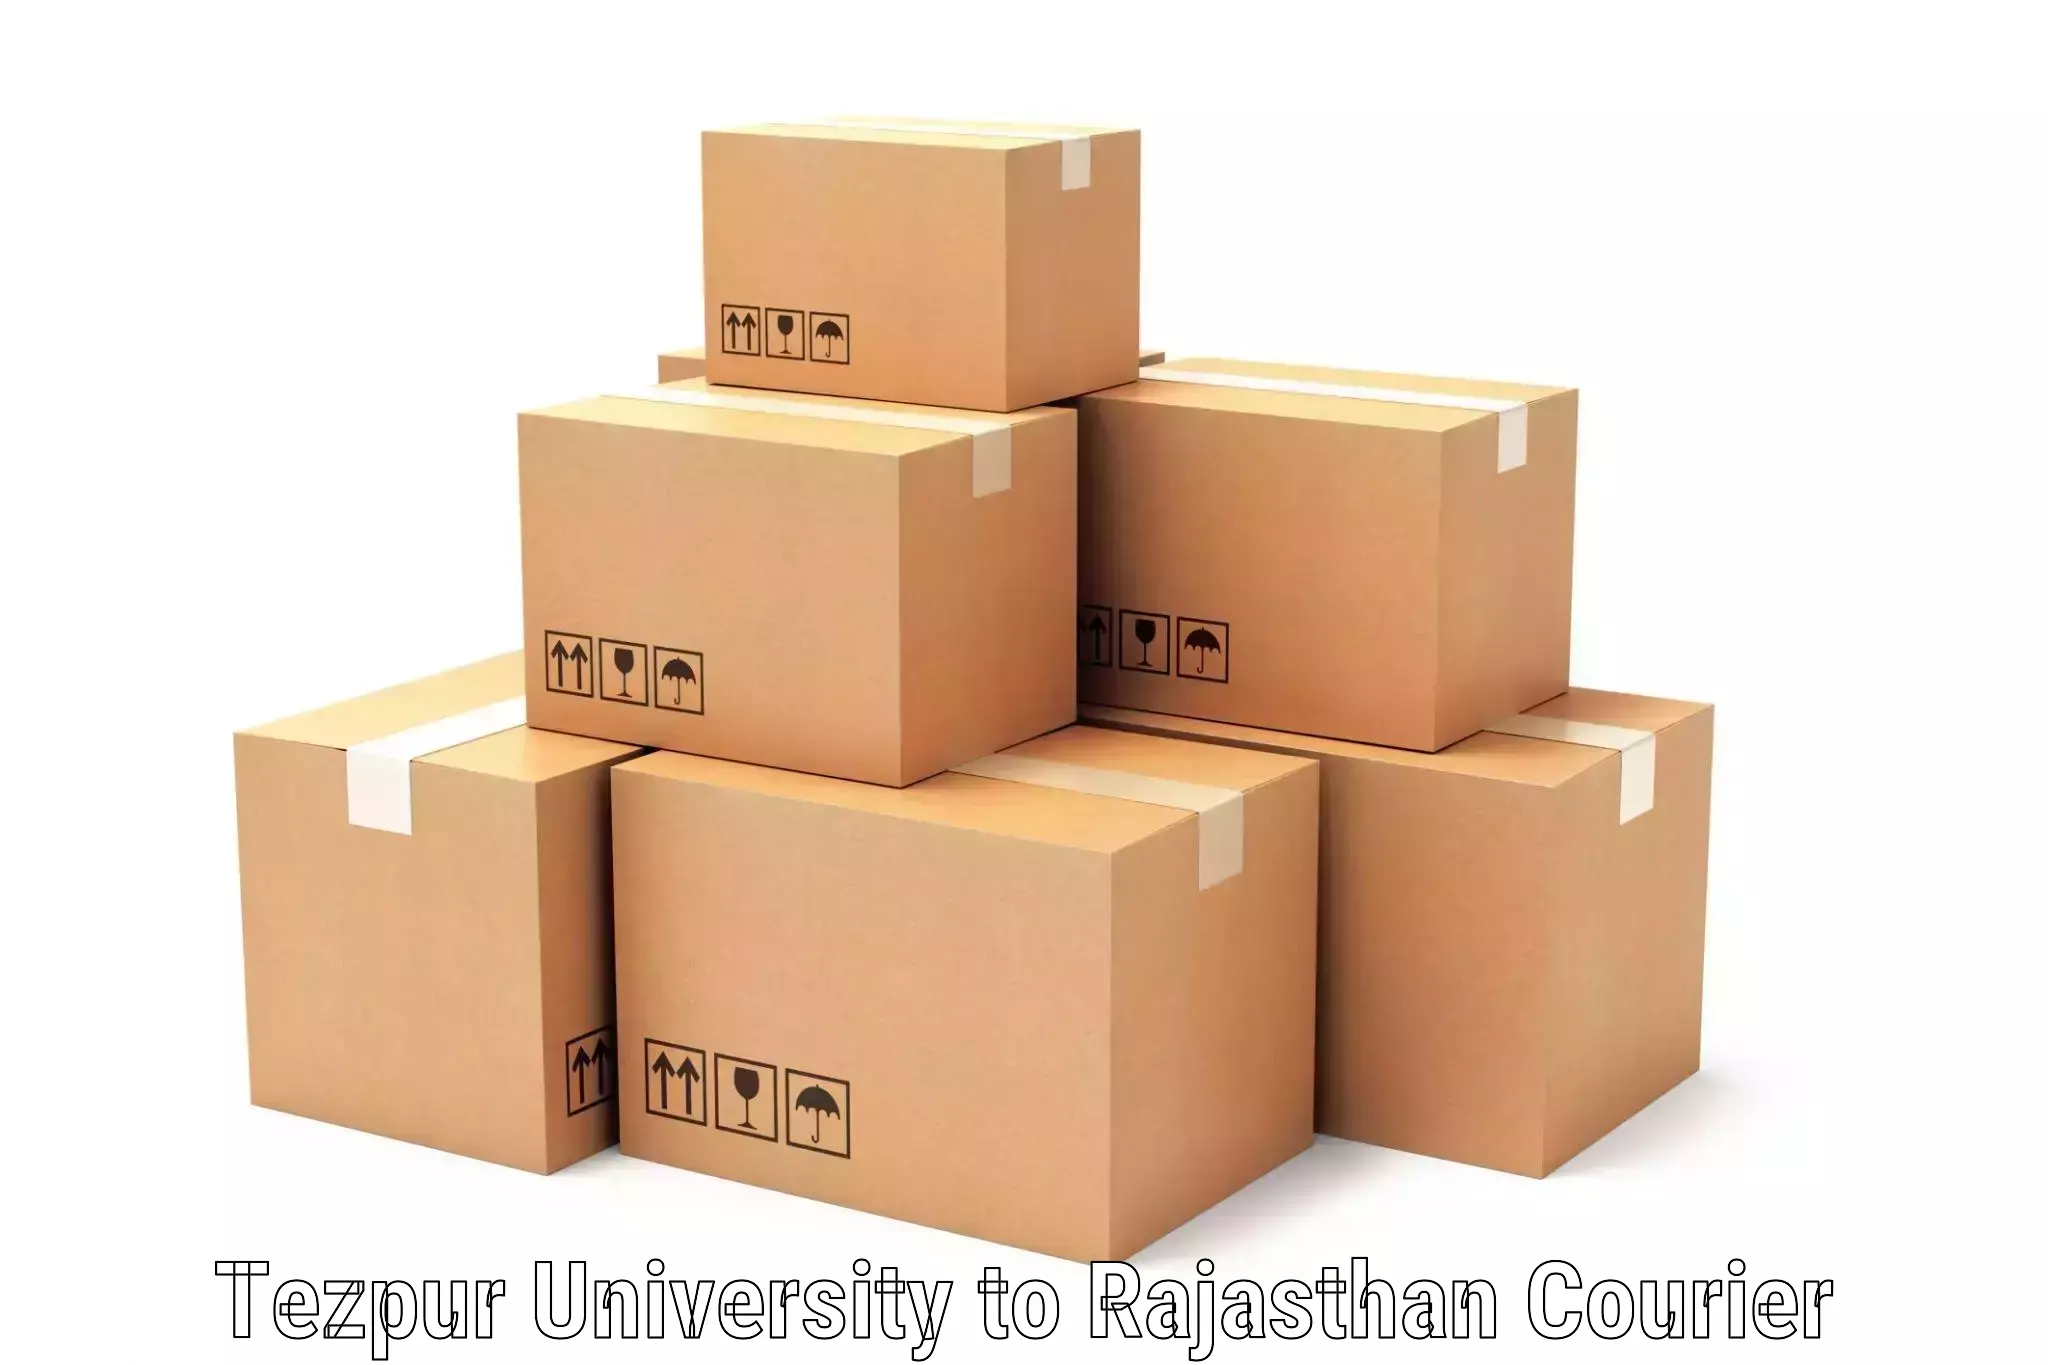 Tailored shipping services Tezpur University to Rajasthan